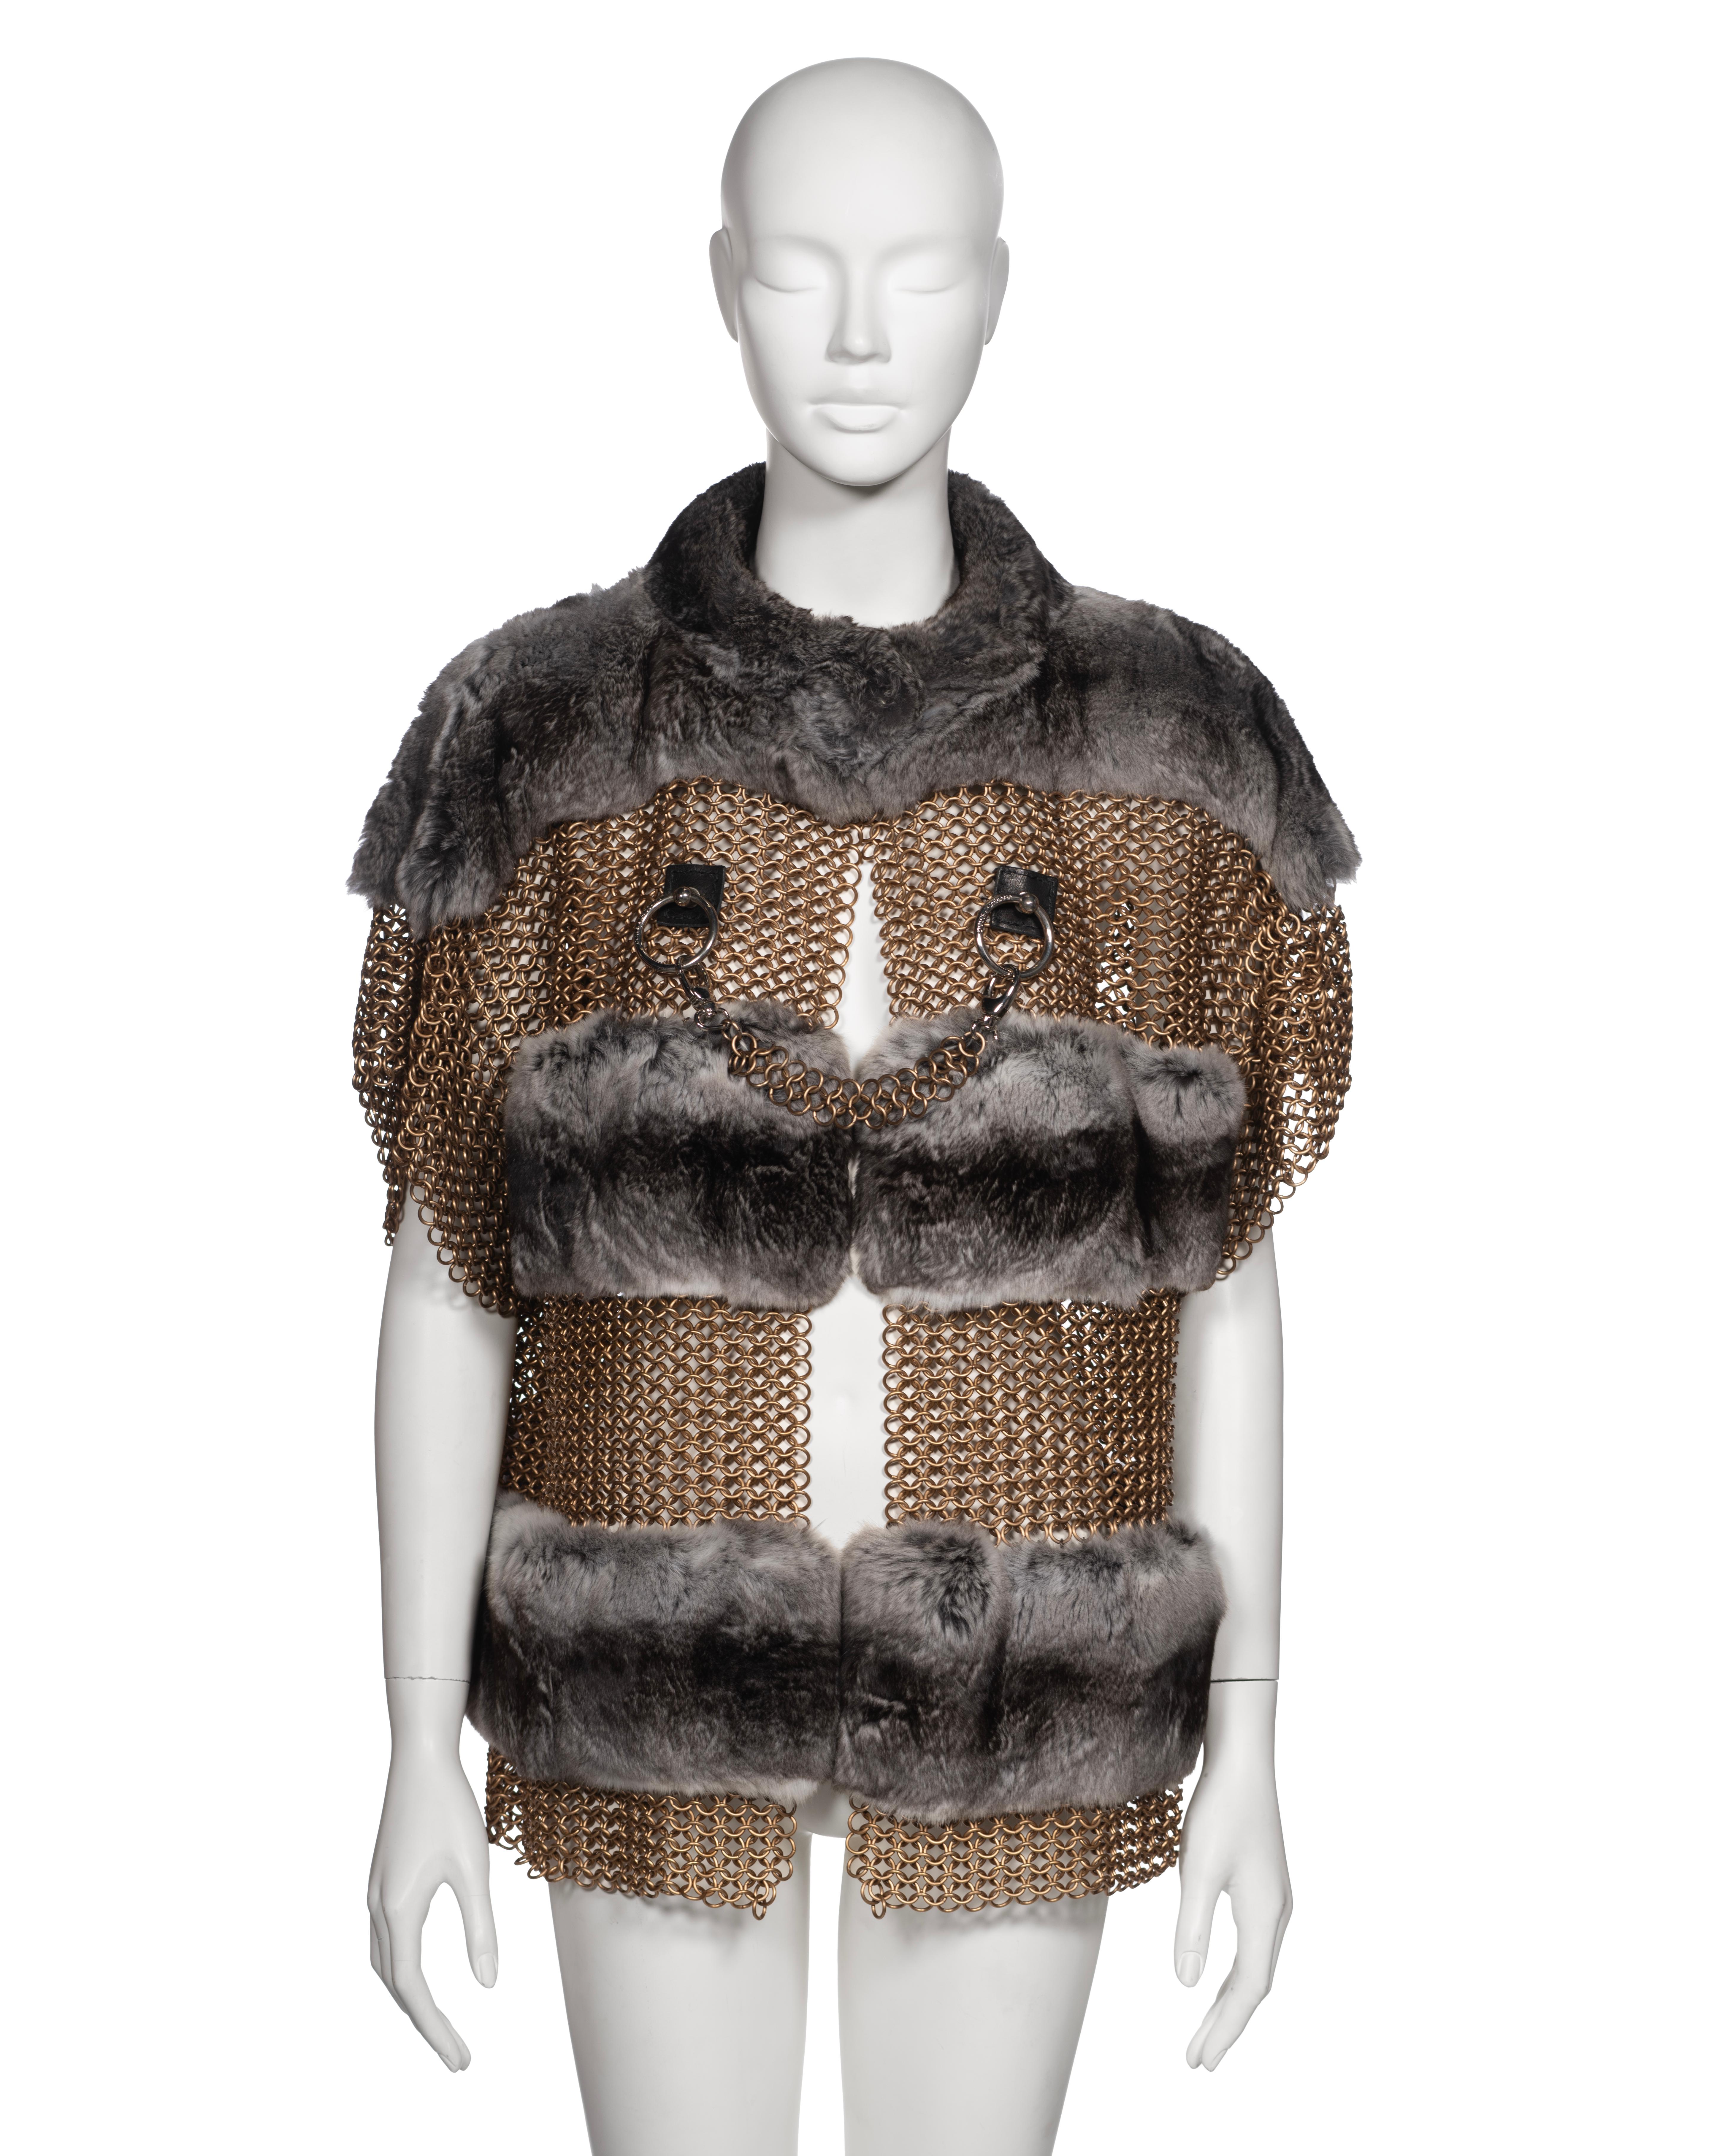 ▪ Archival Dolce & Gabbana Chainmail and Fur Runway Jacket 
▪ Creative Director: Domenico Dolce and Stefano Gabbana 
▪ Spring-Summer 2003
▪ Sold by One of a Kind Archive
▪ Comprised of bronze-tone metal chainmail and chinchilla fur bands
▪ Featuring